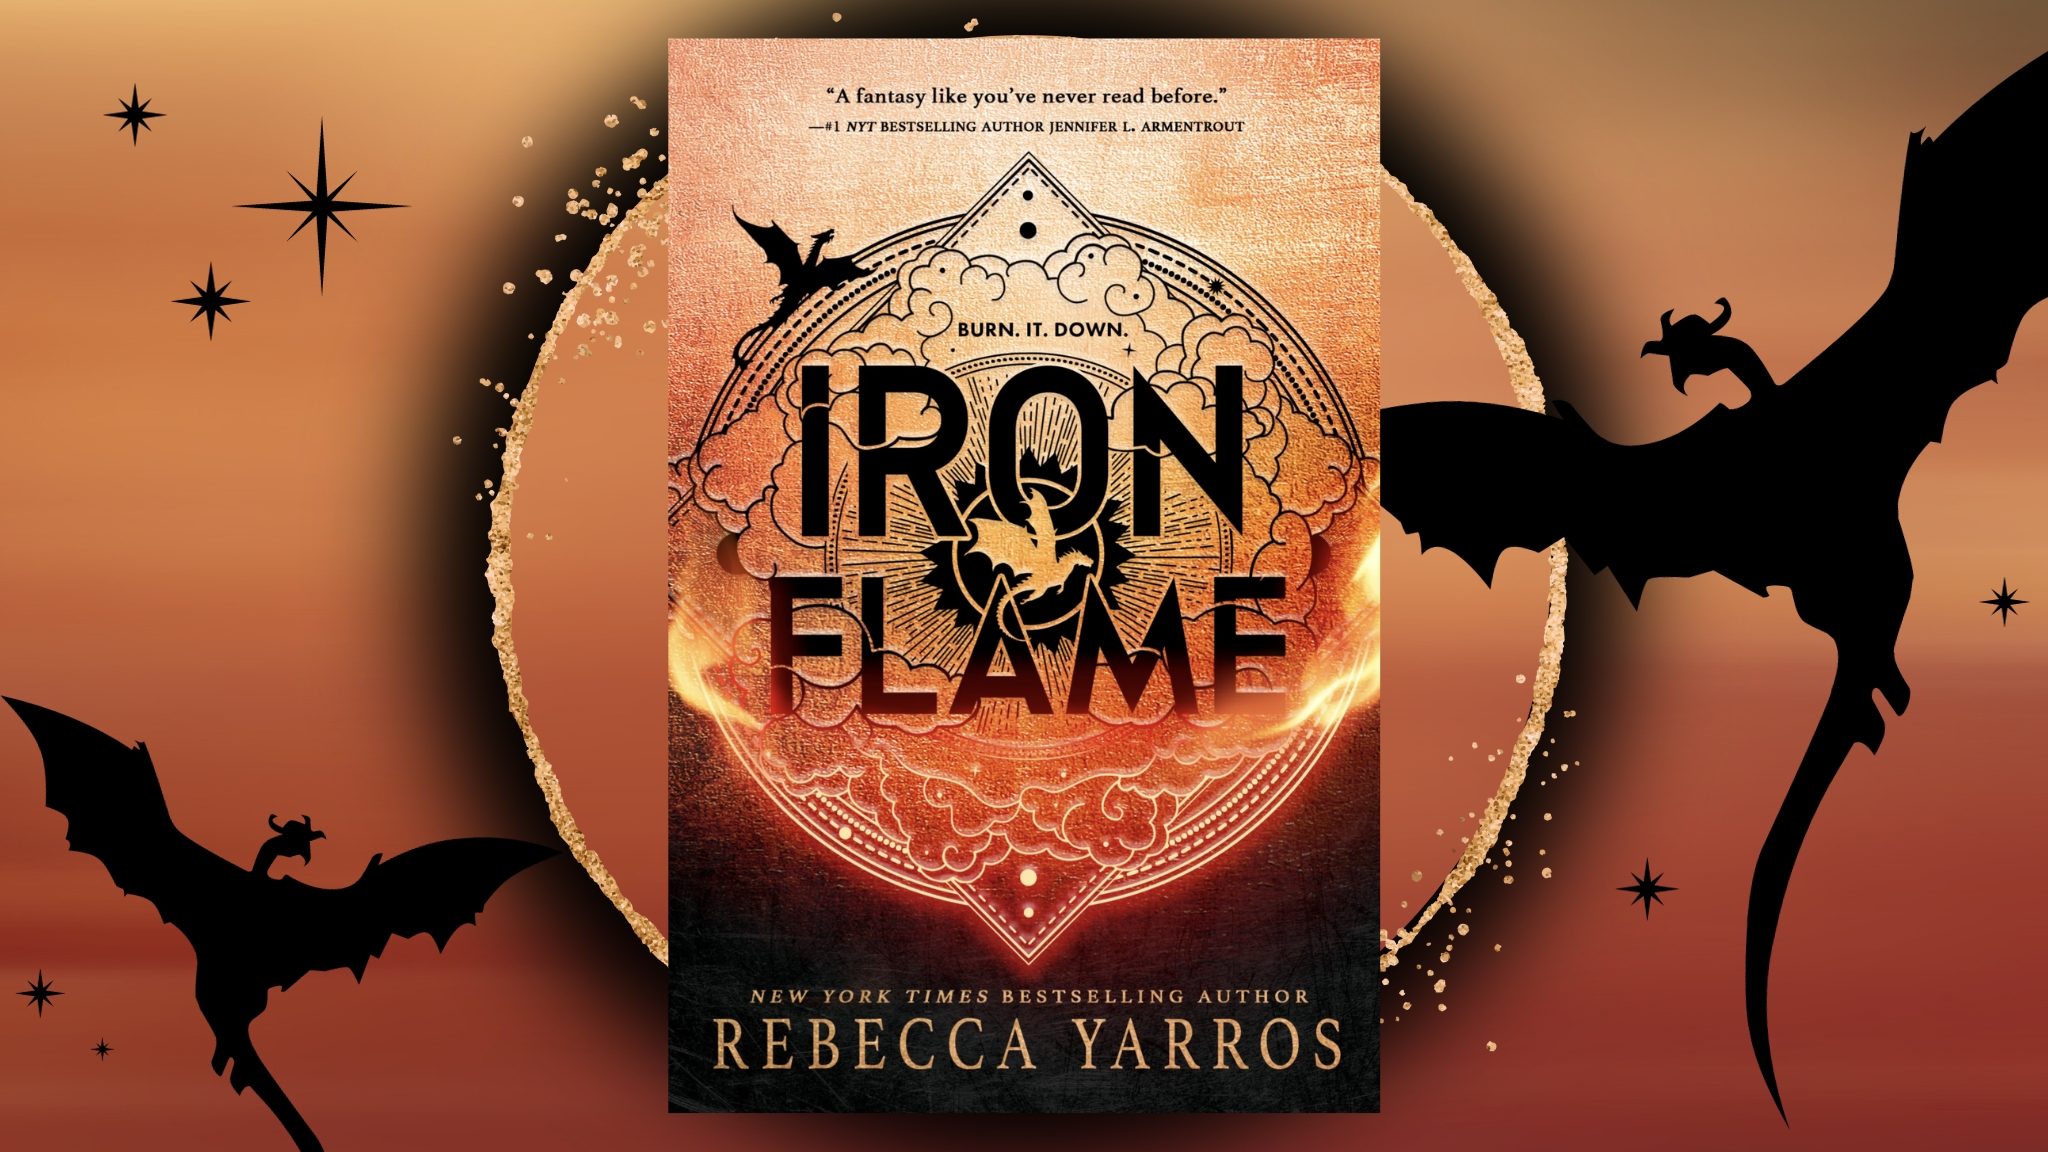 Iron Flame by Rebecca Yarros - Review